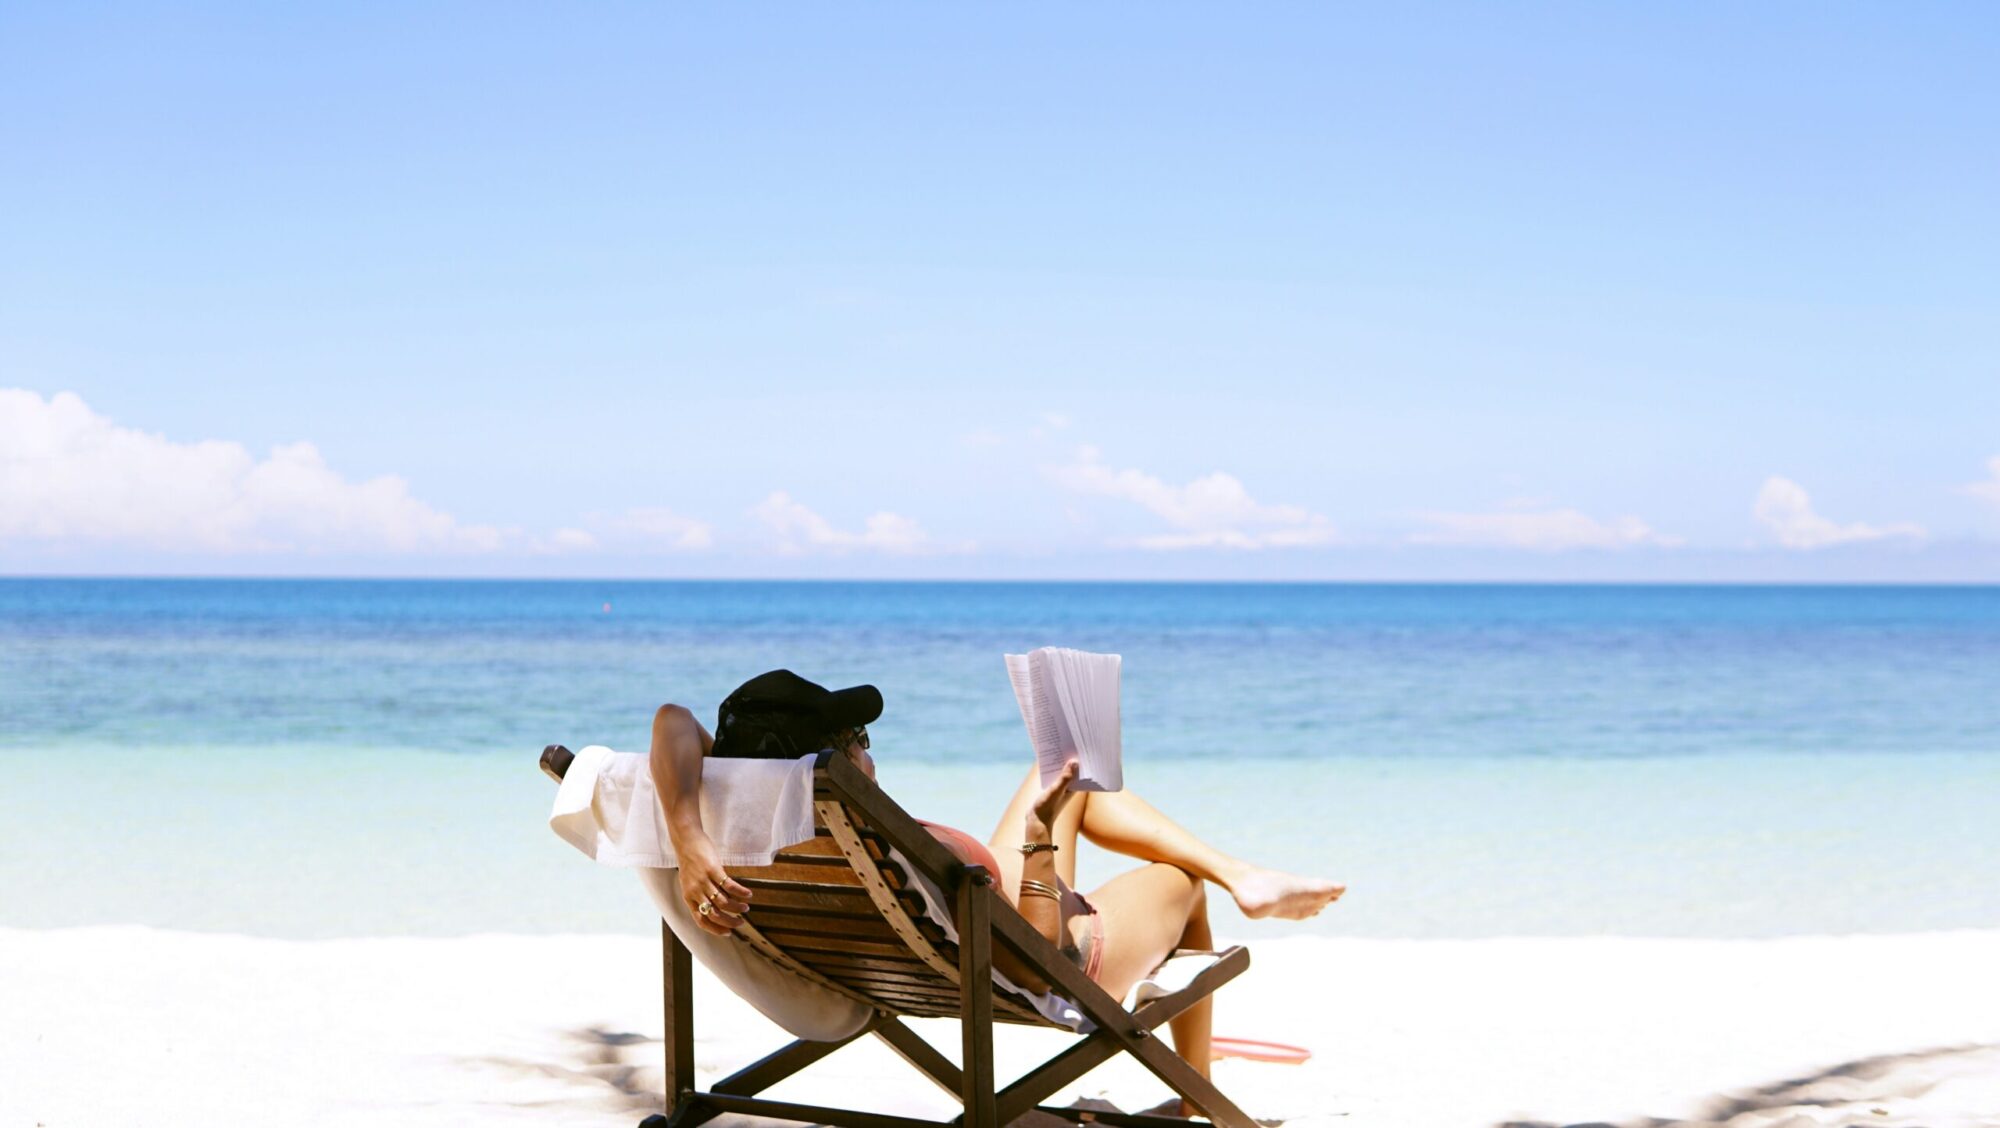 How the Business Can Stay Productive While Going On Vacation